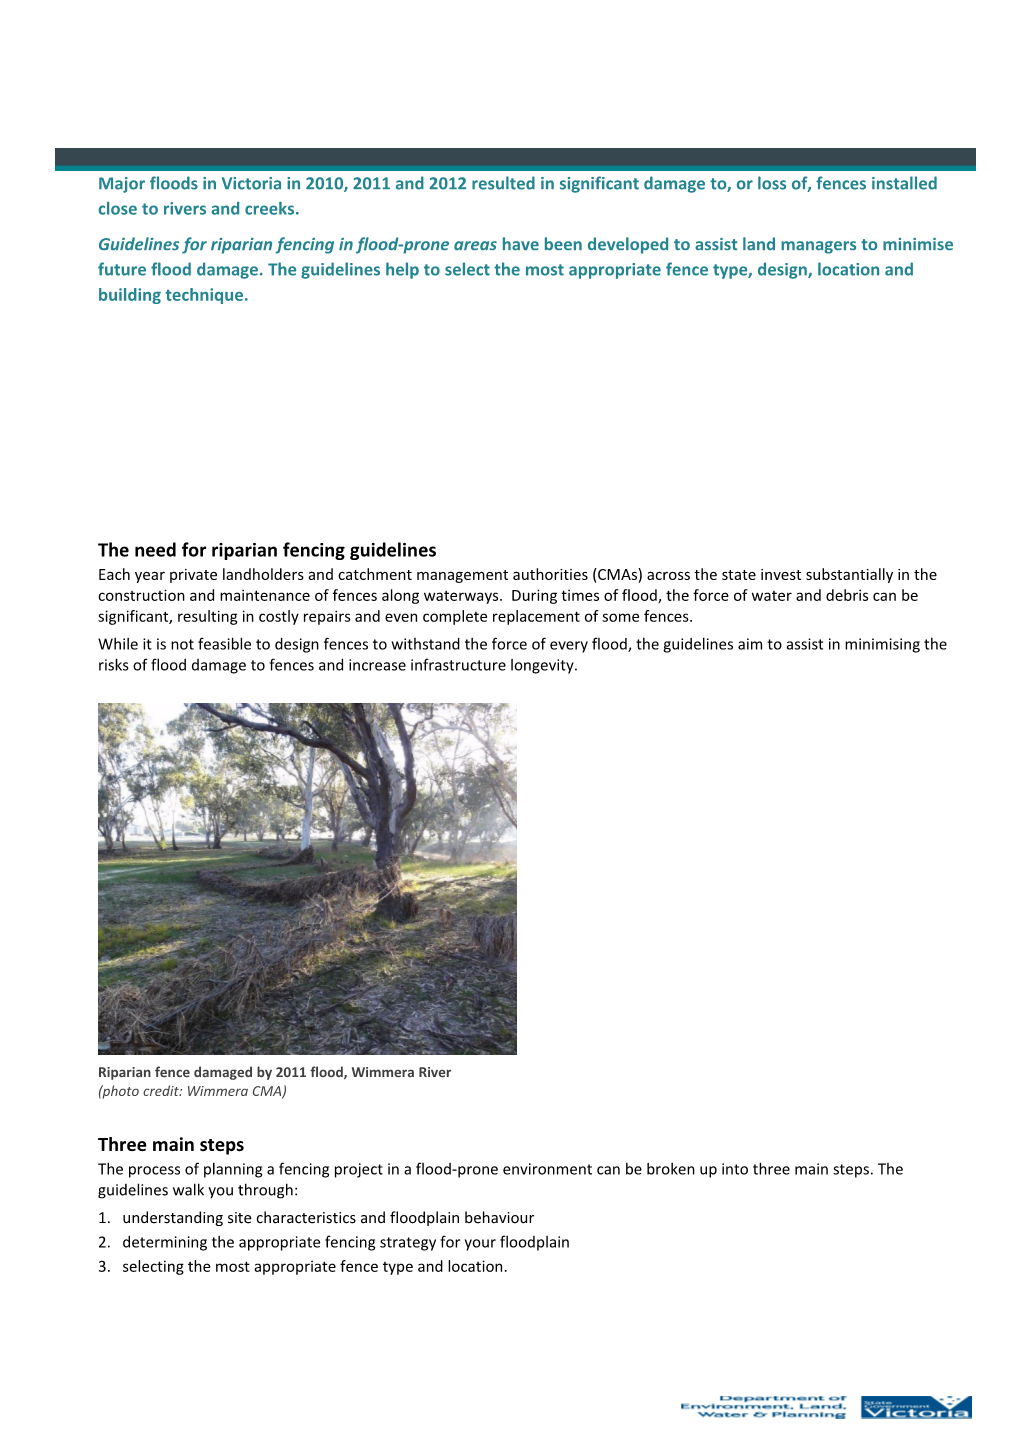 The Need for Riparian Fencing Guidelines